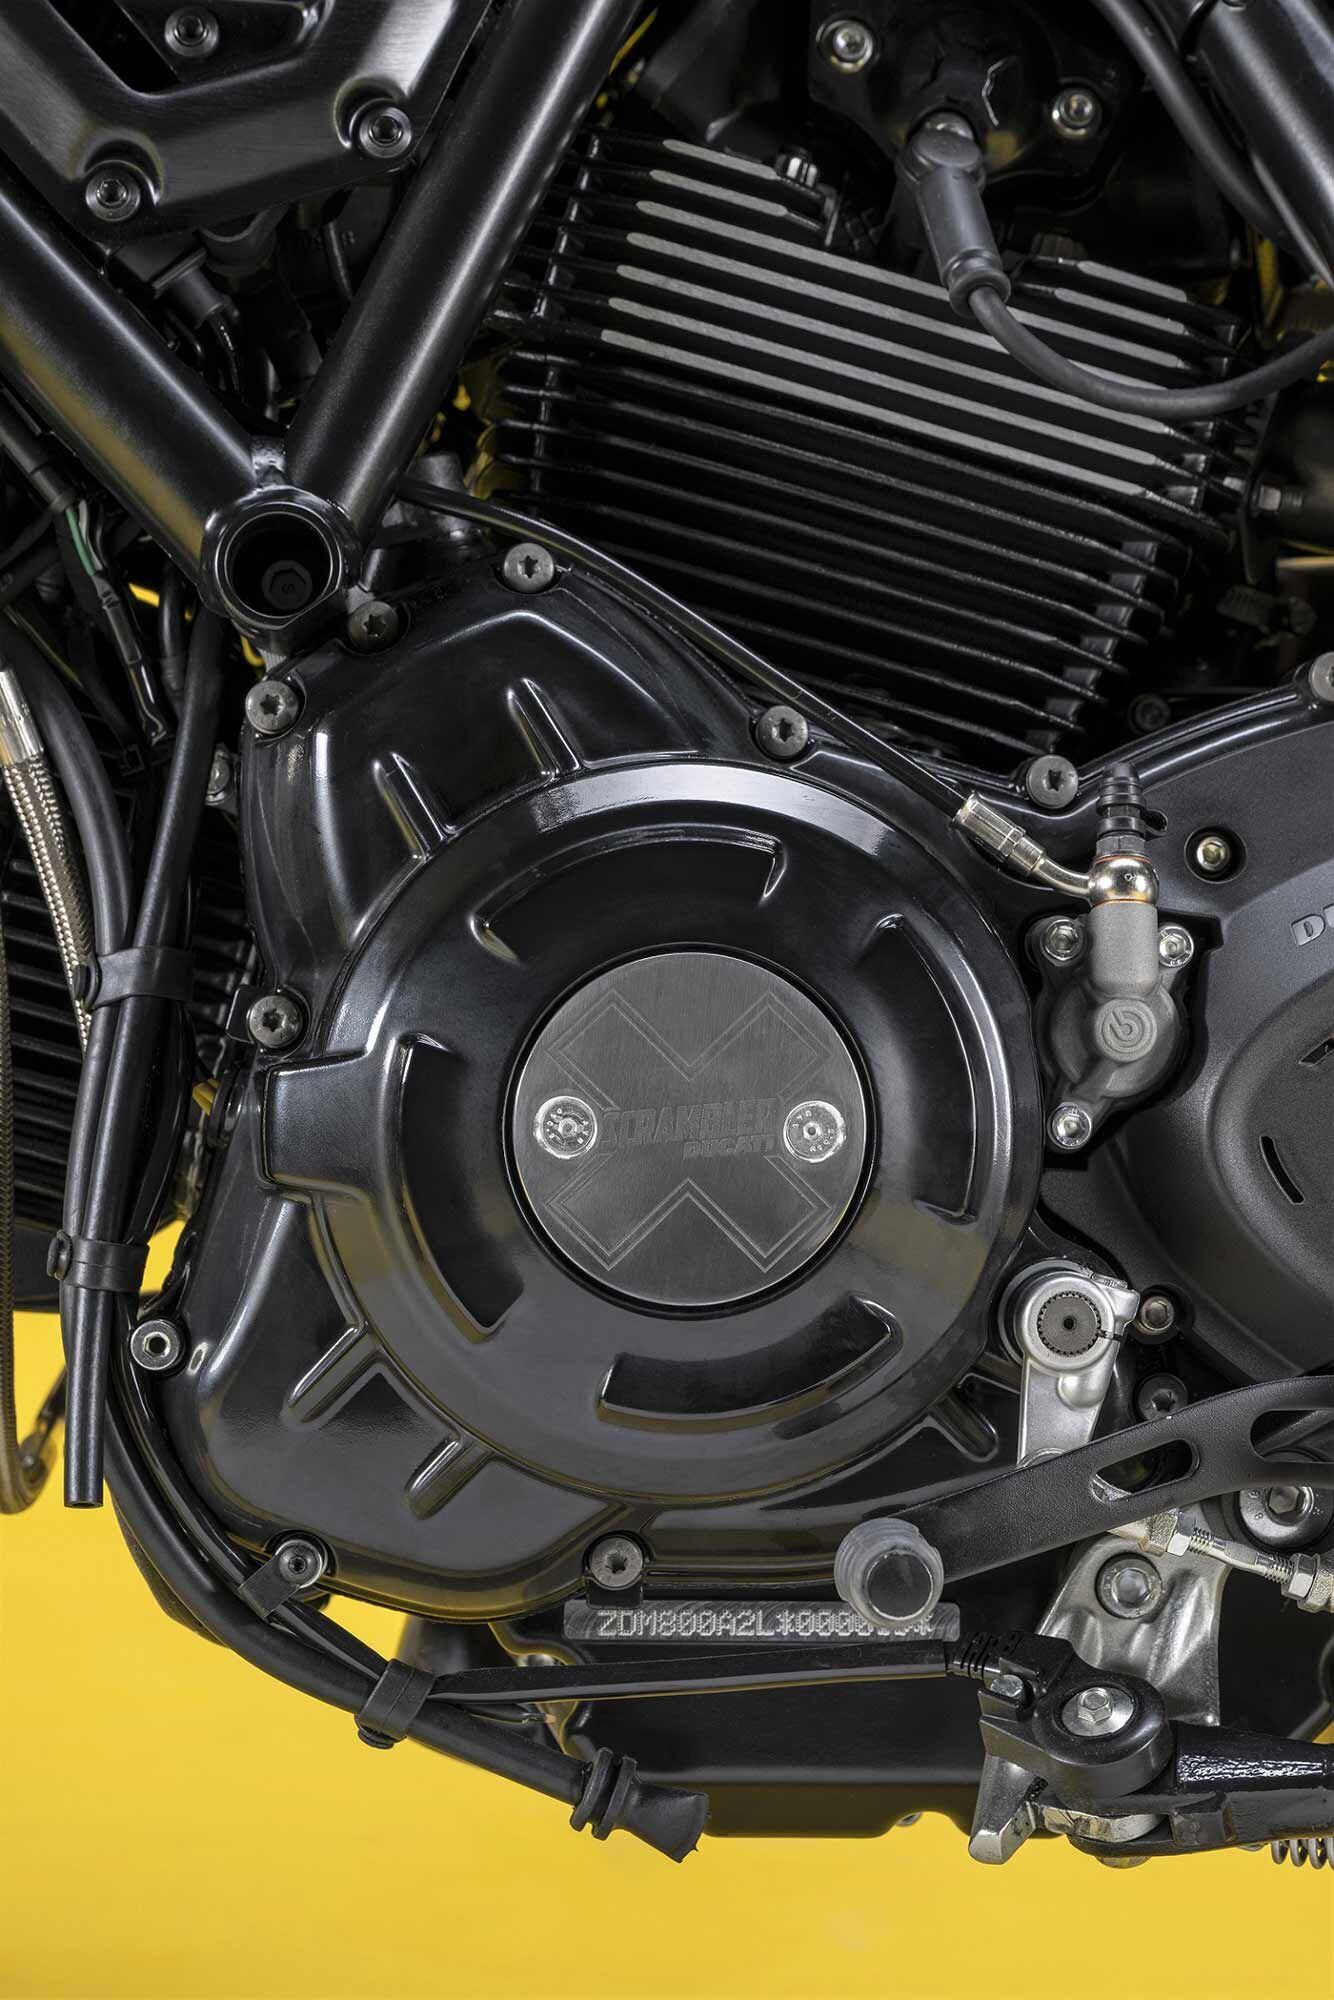 The signature air-cooled twin-cylinder Desmodue engine gets new internals, which reduce weight by more than 5 pounds compared to the previous generation. However, its 73 hp output remains unchanged.